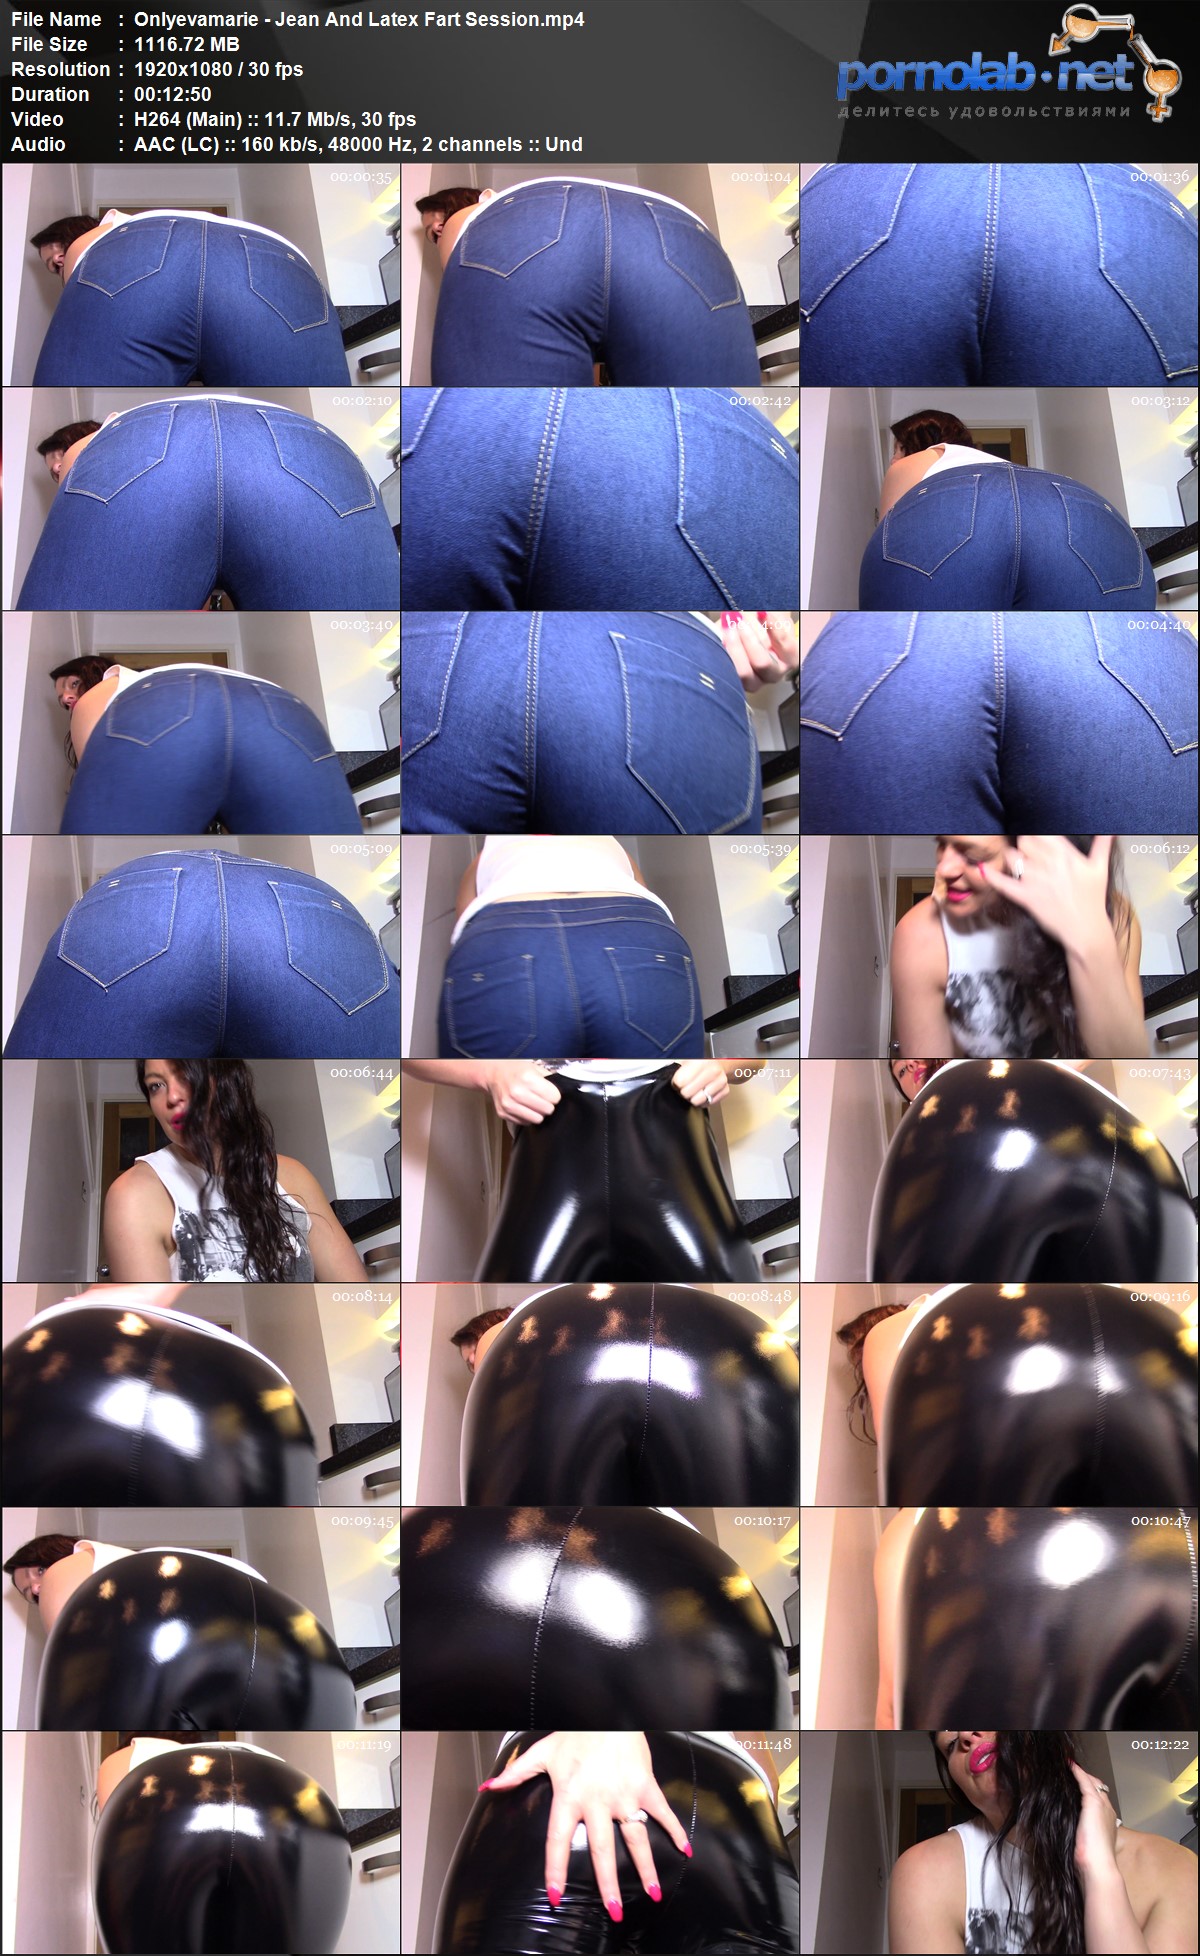 Onlyevamarie Jean And Latex Fart Session mp 4